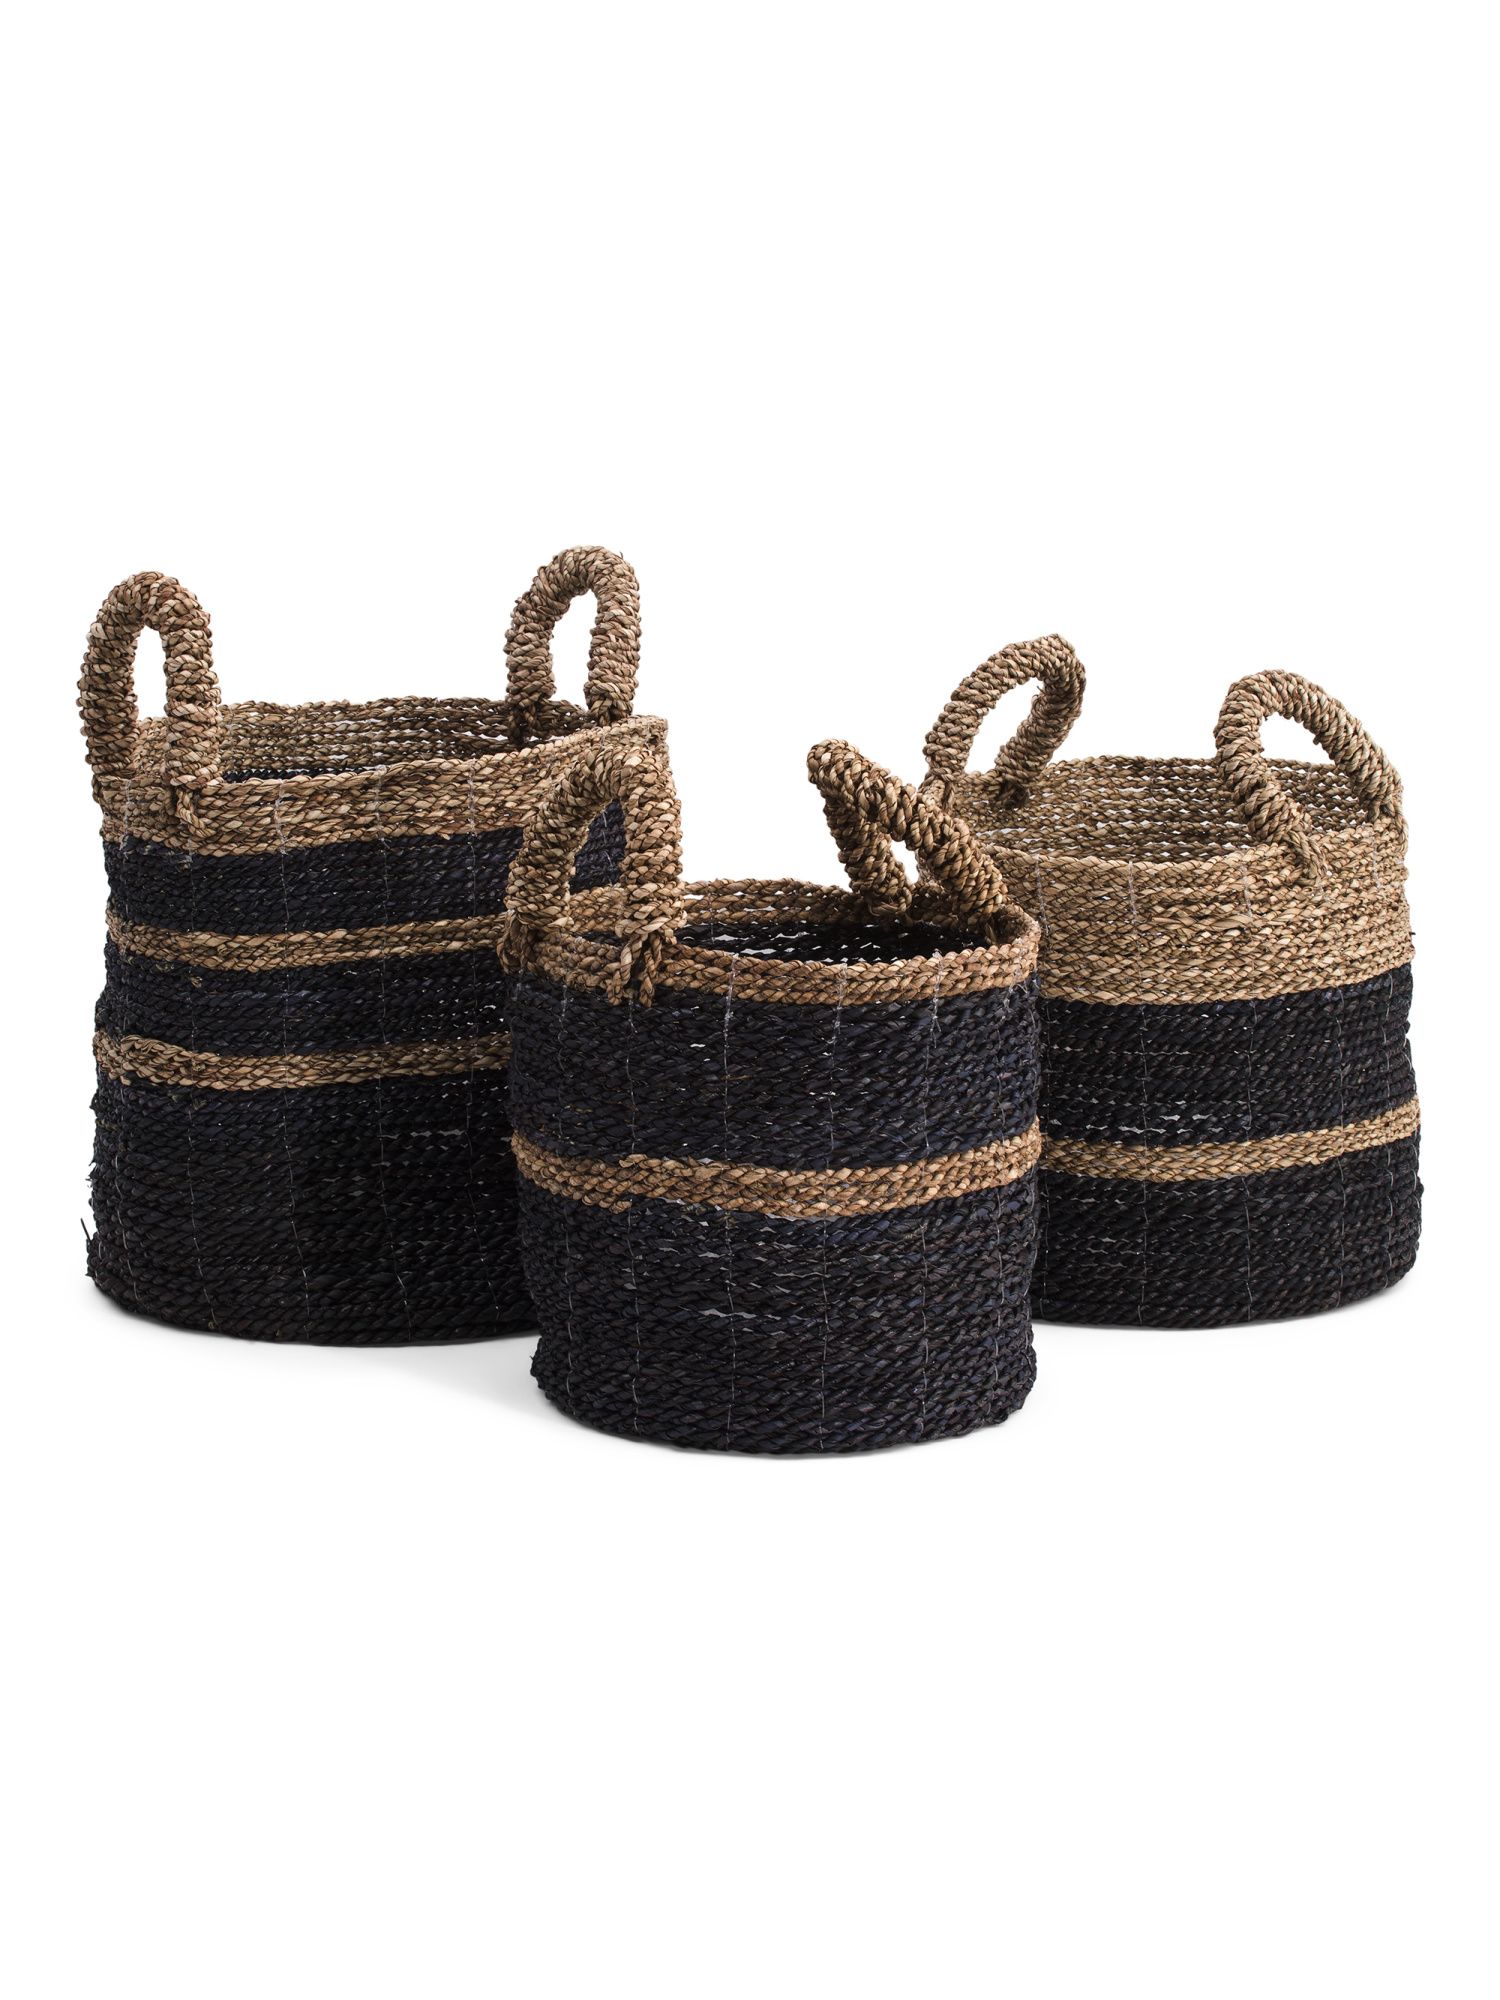 Round Seagrass Black And Natural Color Striped Basket Collection | TJ Maxx